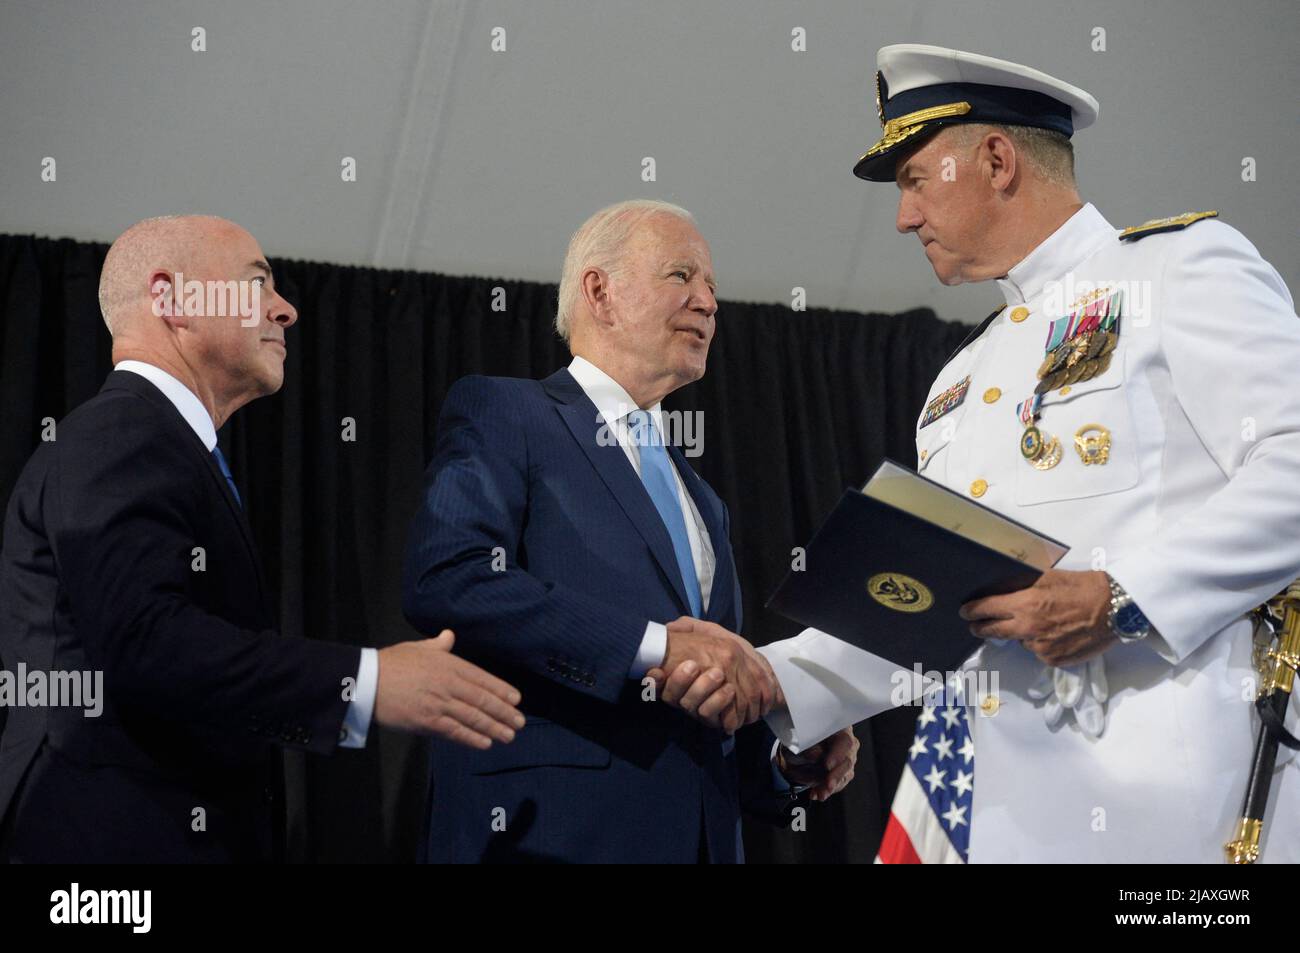 U.S. Coast Guard Adm. Karl L. Schultz shakes hand with President Joe Biden and Homeland Security Secretary Alejandro Mayorkas (L) during a change of command ceremony at Coast Guard Headquarters in Washington, DC on Wednesday, June 1, 2022. Coast Guard Adm. Linda Fagan is taking over command from Schultz. Photo by Bonnie Cash/Pool/ABACAPRESS.COM Stock Photo